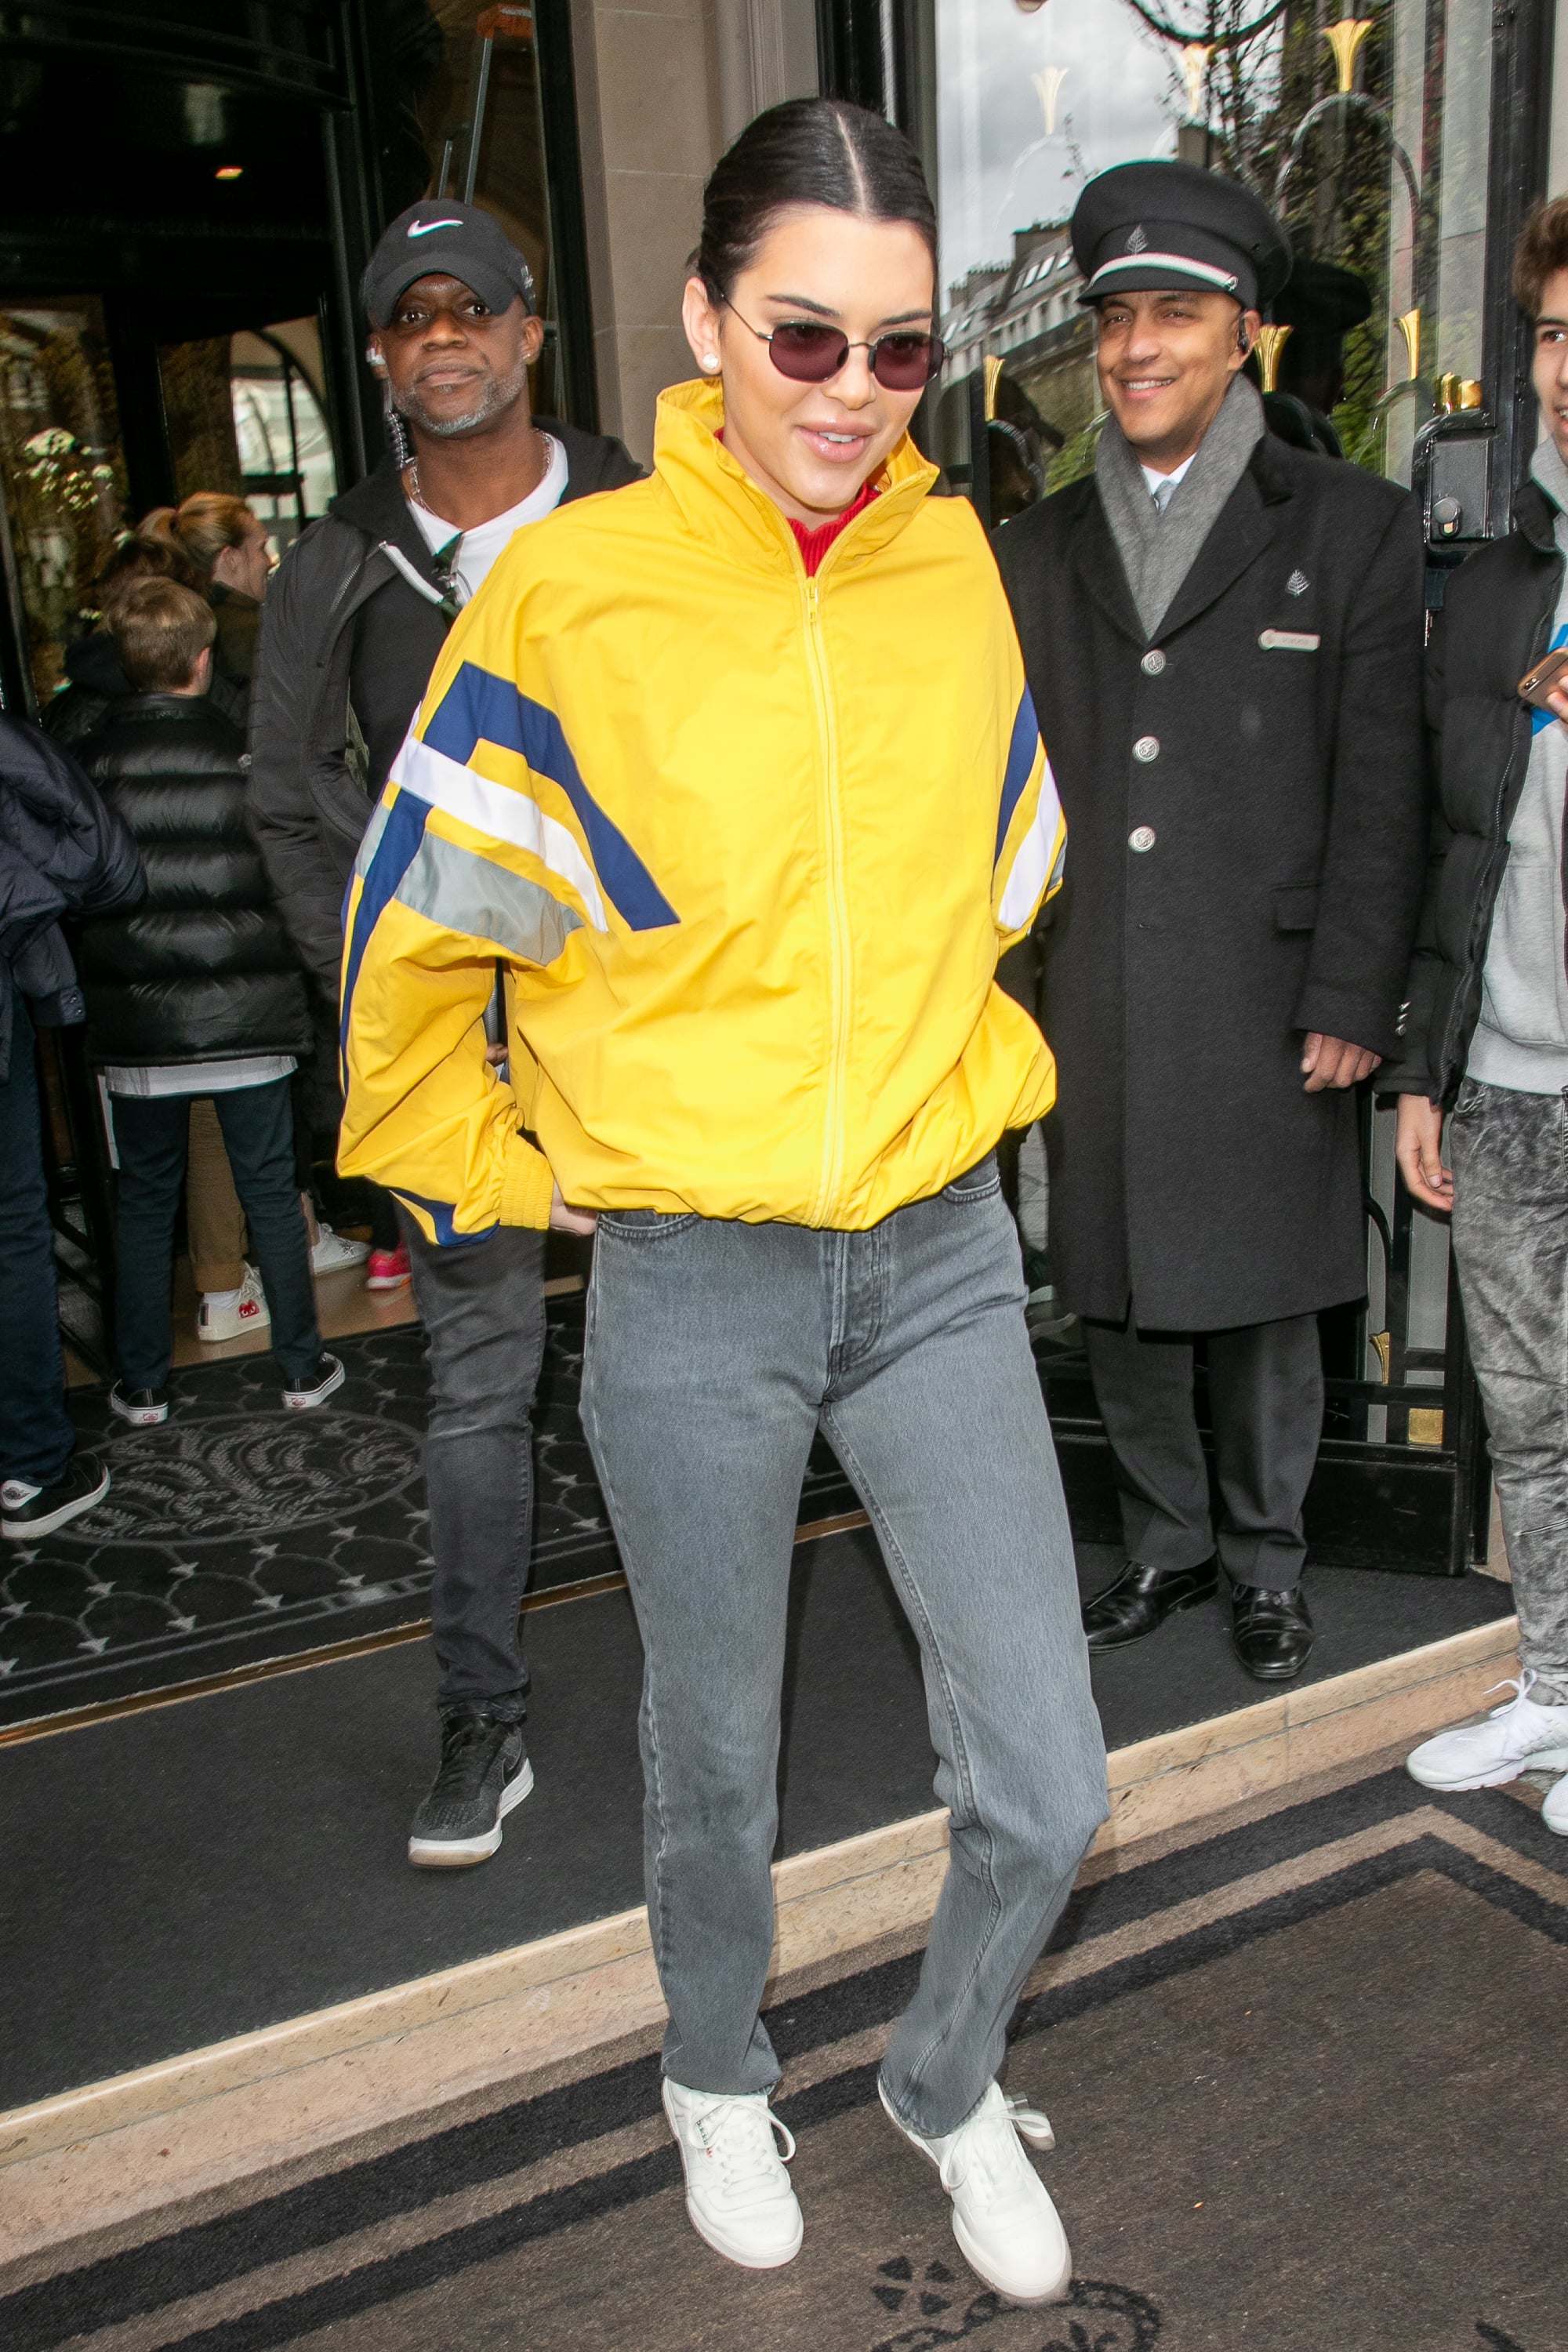 Kendall's yellow Balenciaga jacket popped on the streets of Paris. She wore it with grey Yeezy jeans and white Adidas low-tops.